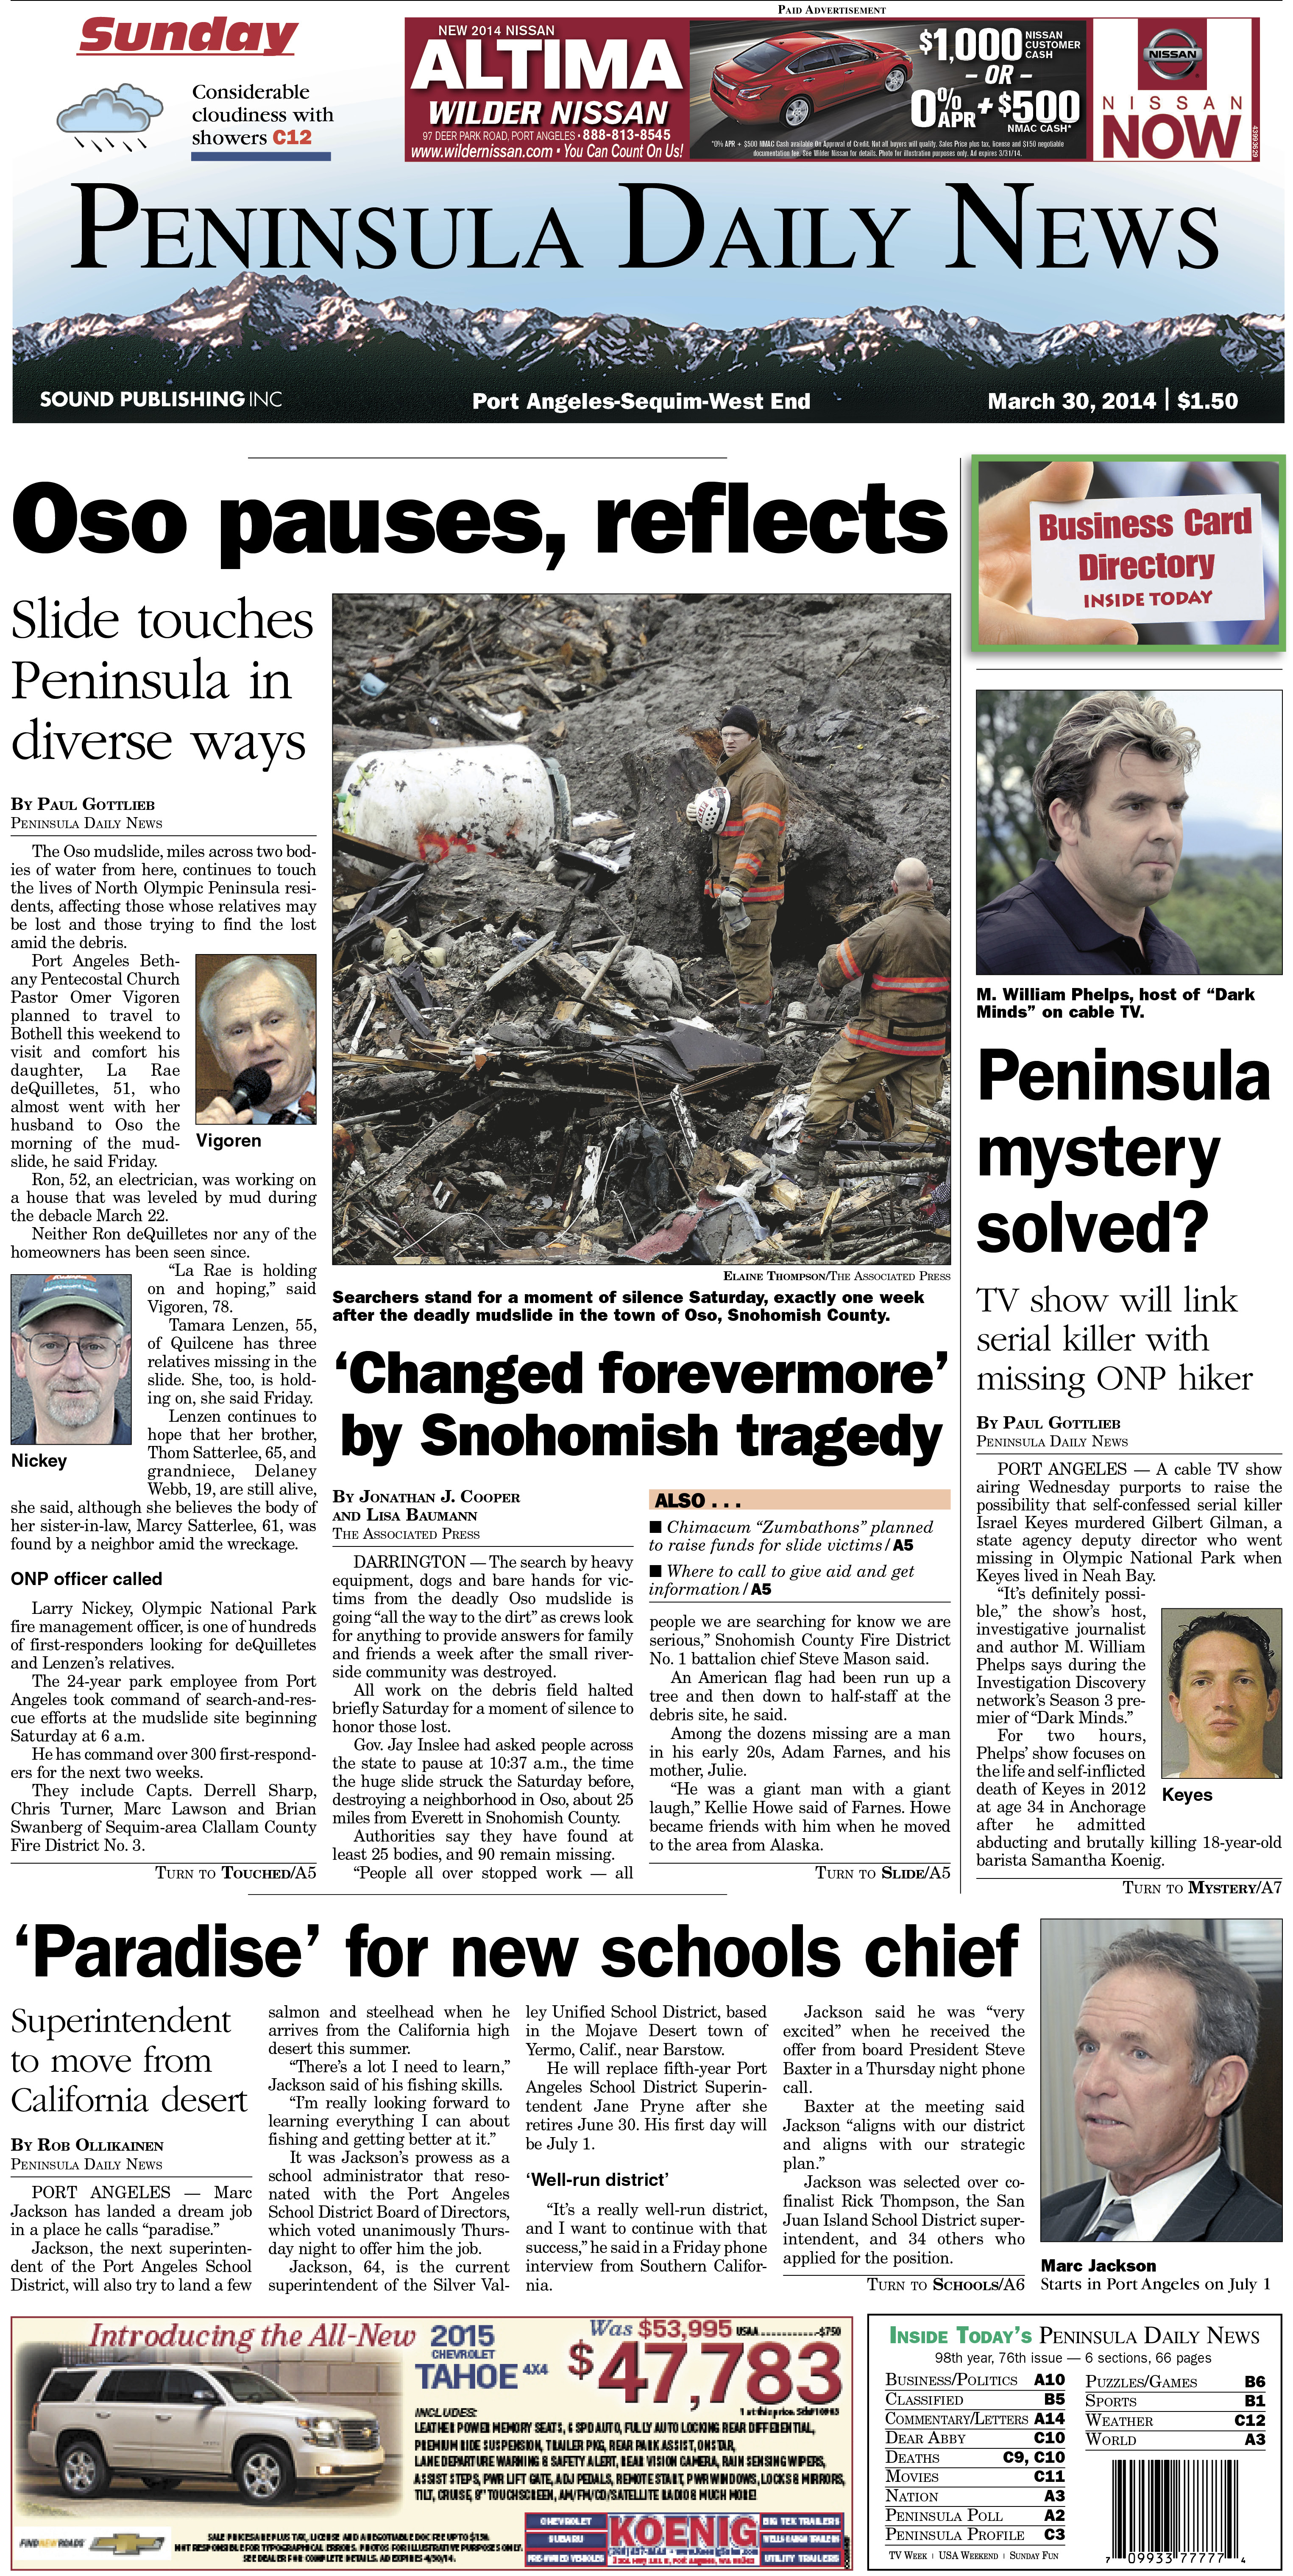 Today's PDN front page for our Clallam County readers.